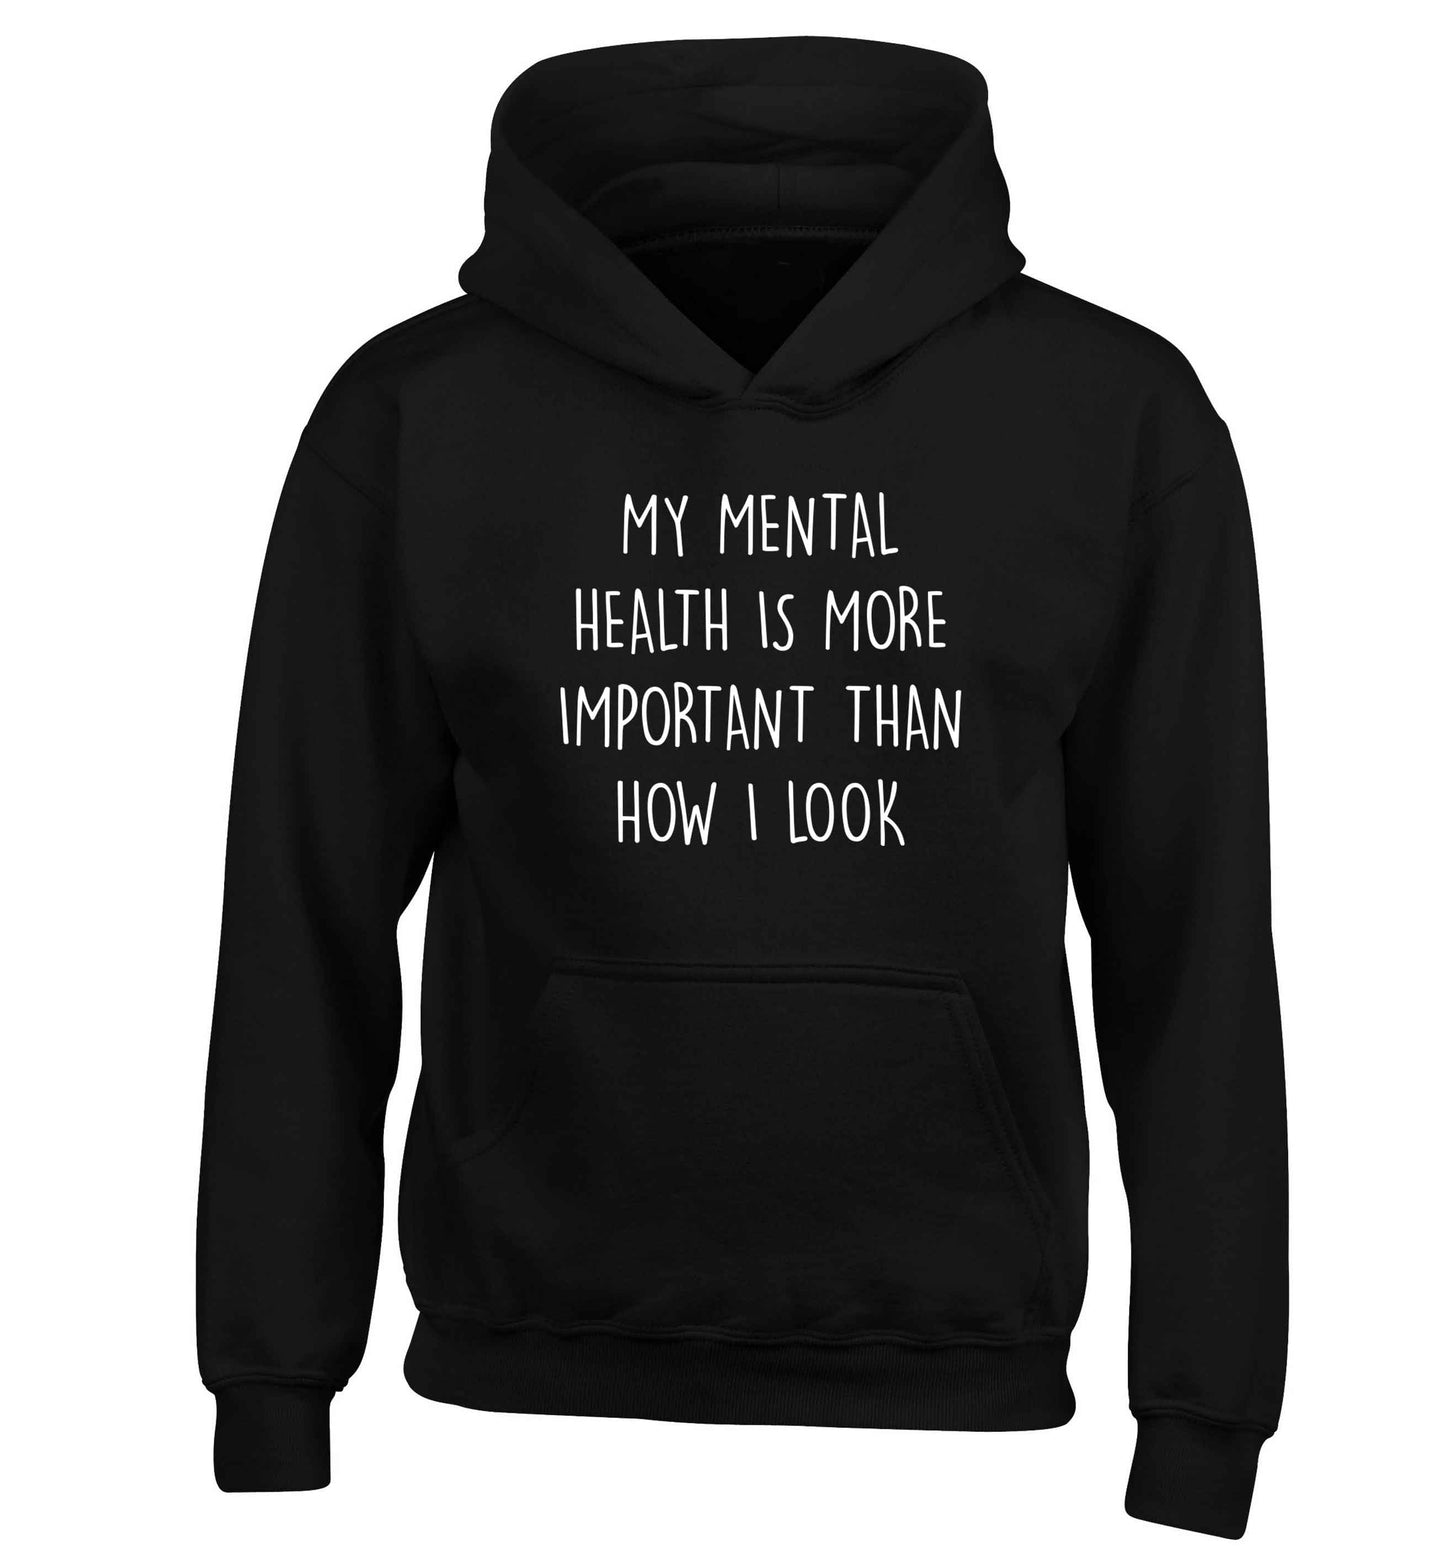 My mental health is more importnat than how I look children's black hoodie 12-13 Years